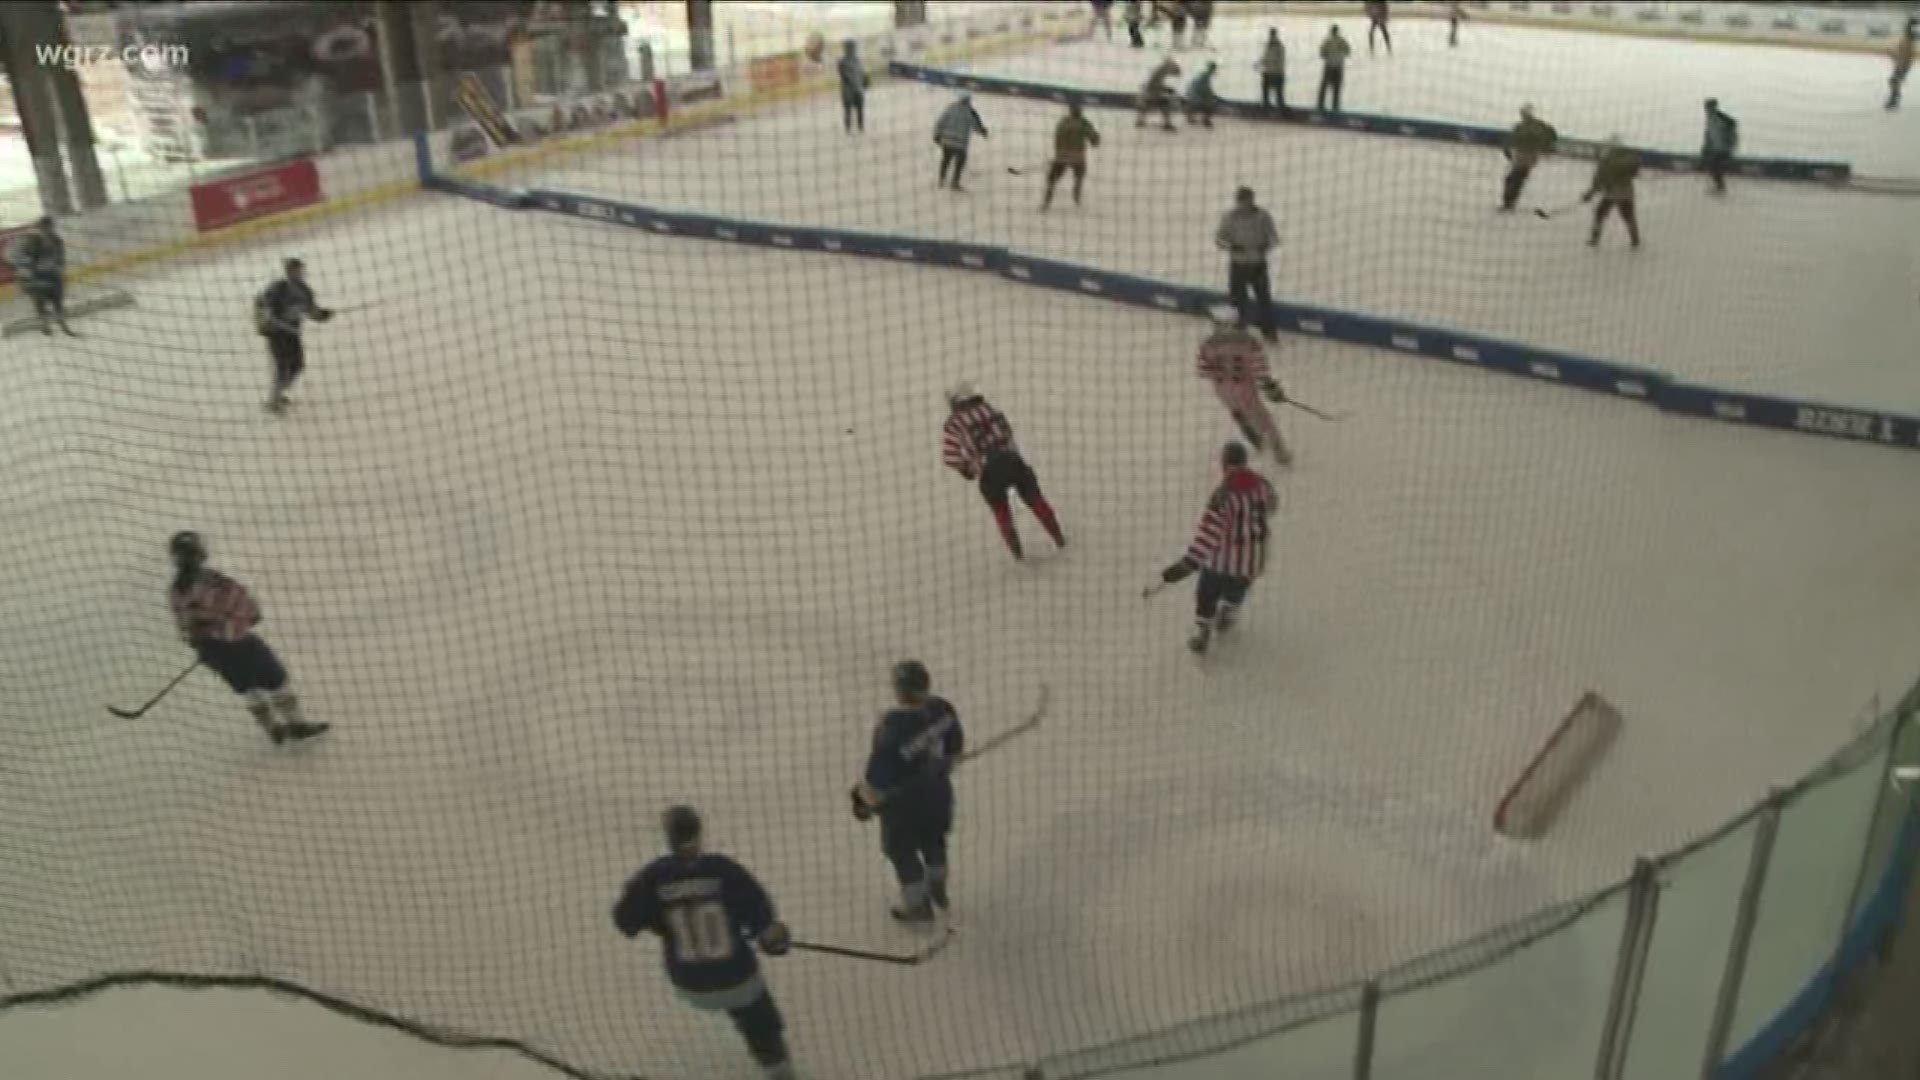 The 4-day event began Thursday night at RiverWorks with a skills competition.